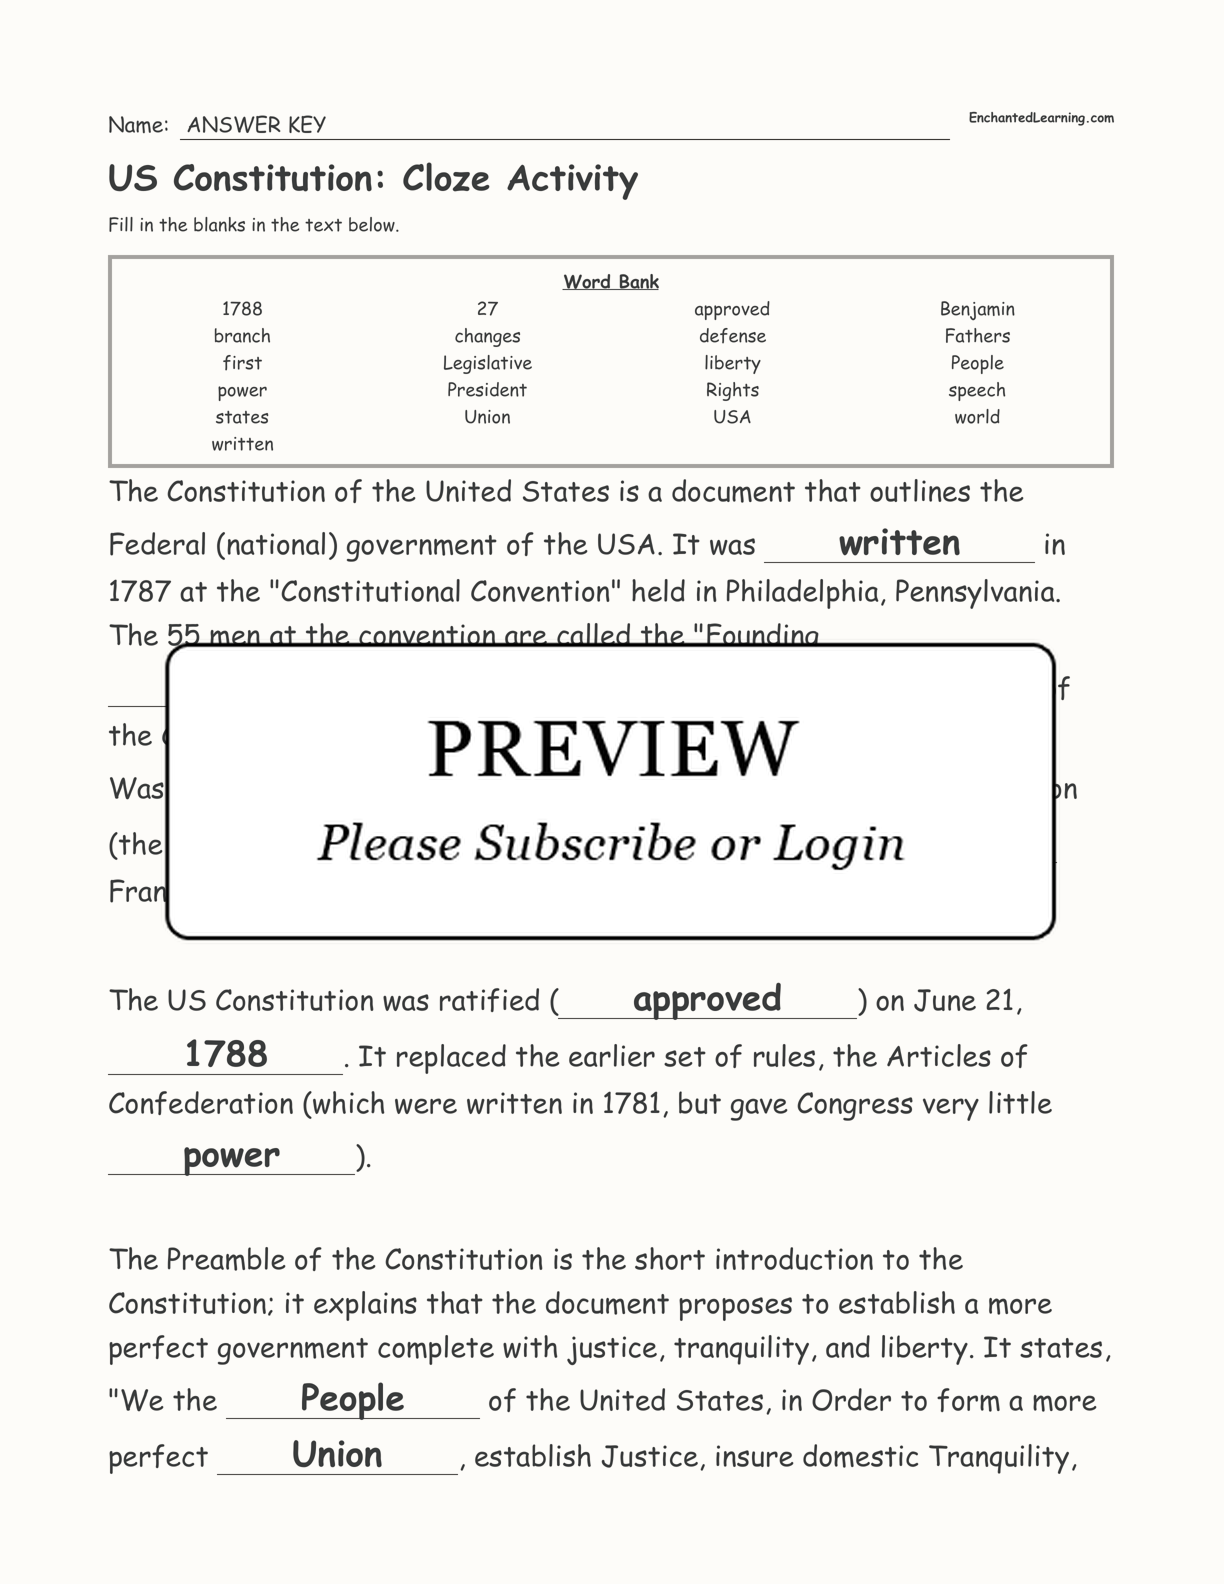 US Constitution: Cloze Activity interactive worksheet page 3